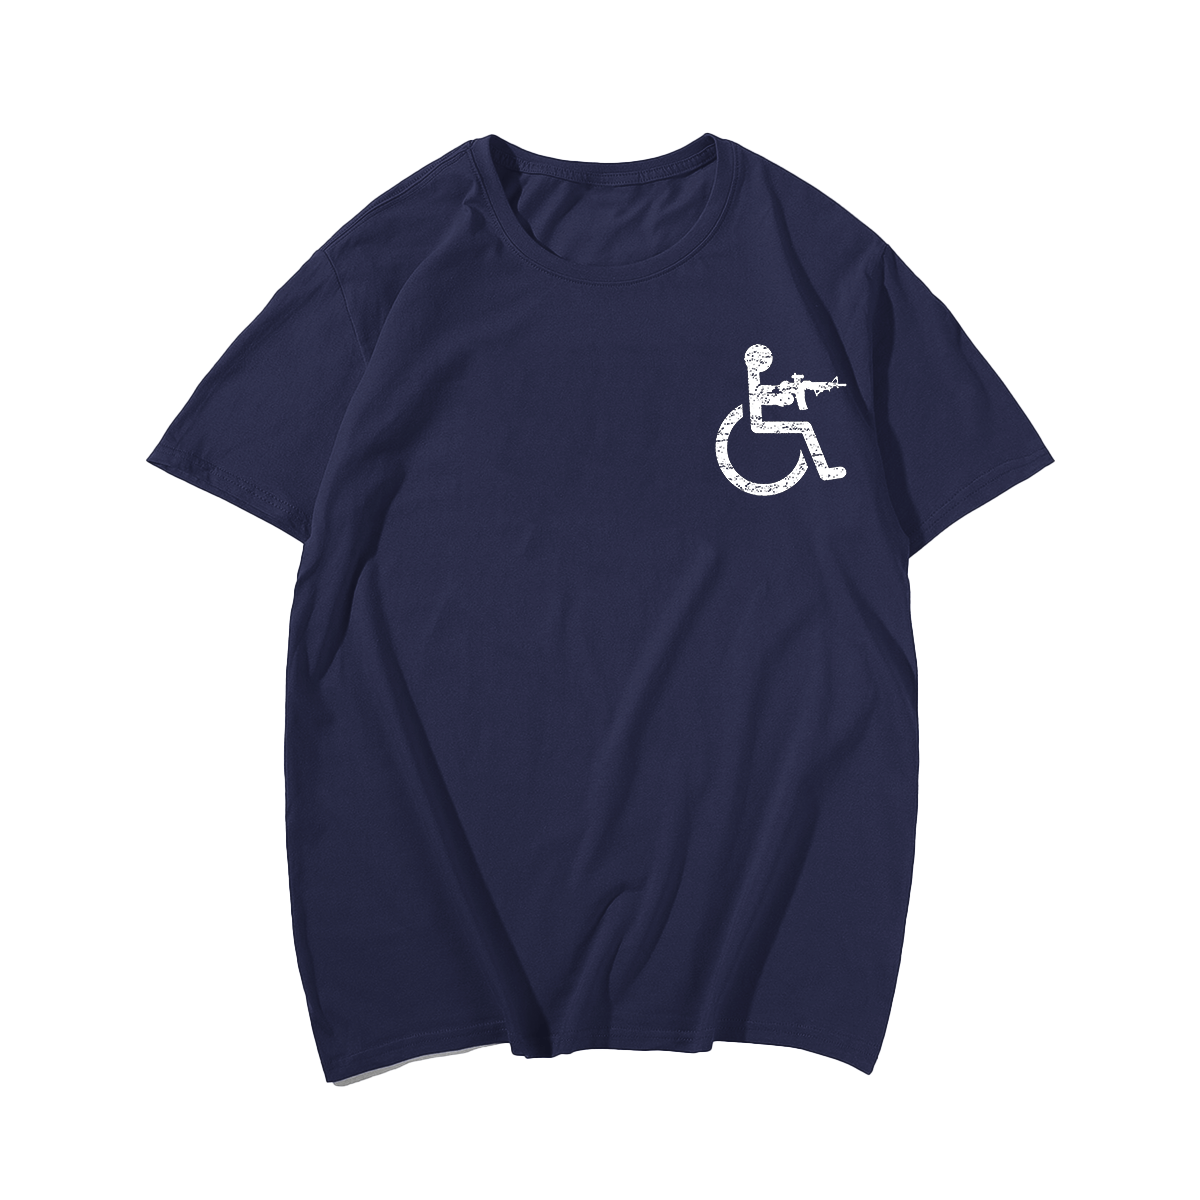 Disabled But Deadly Plus Size T-Shirt